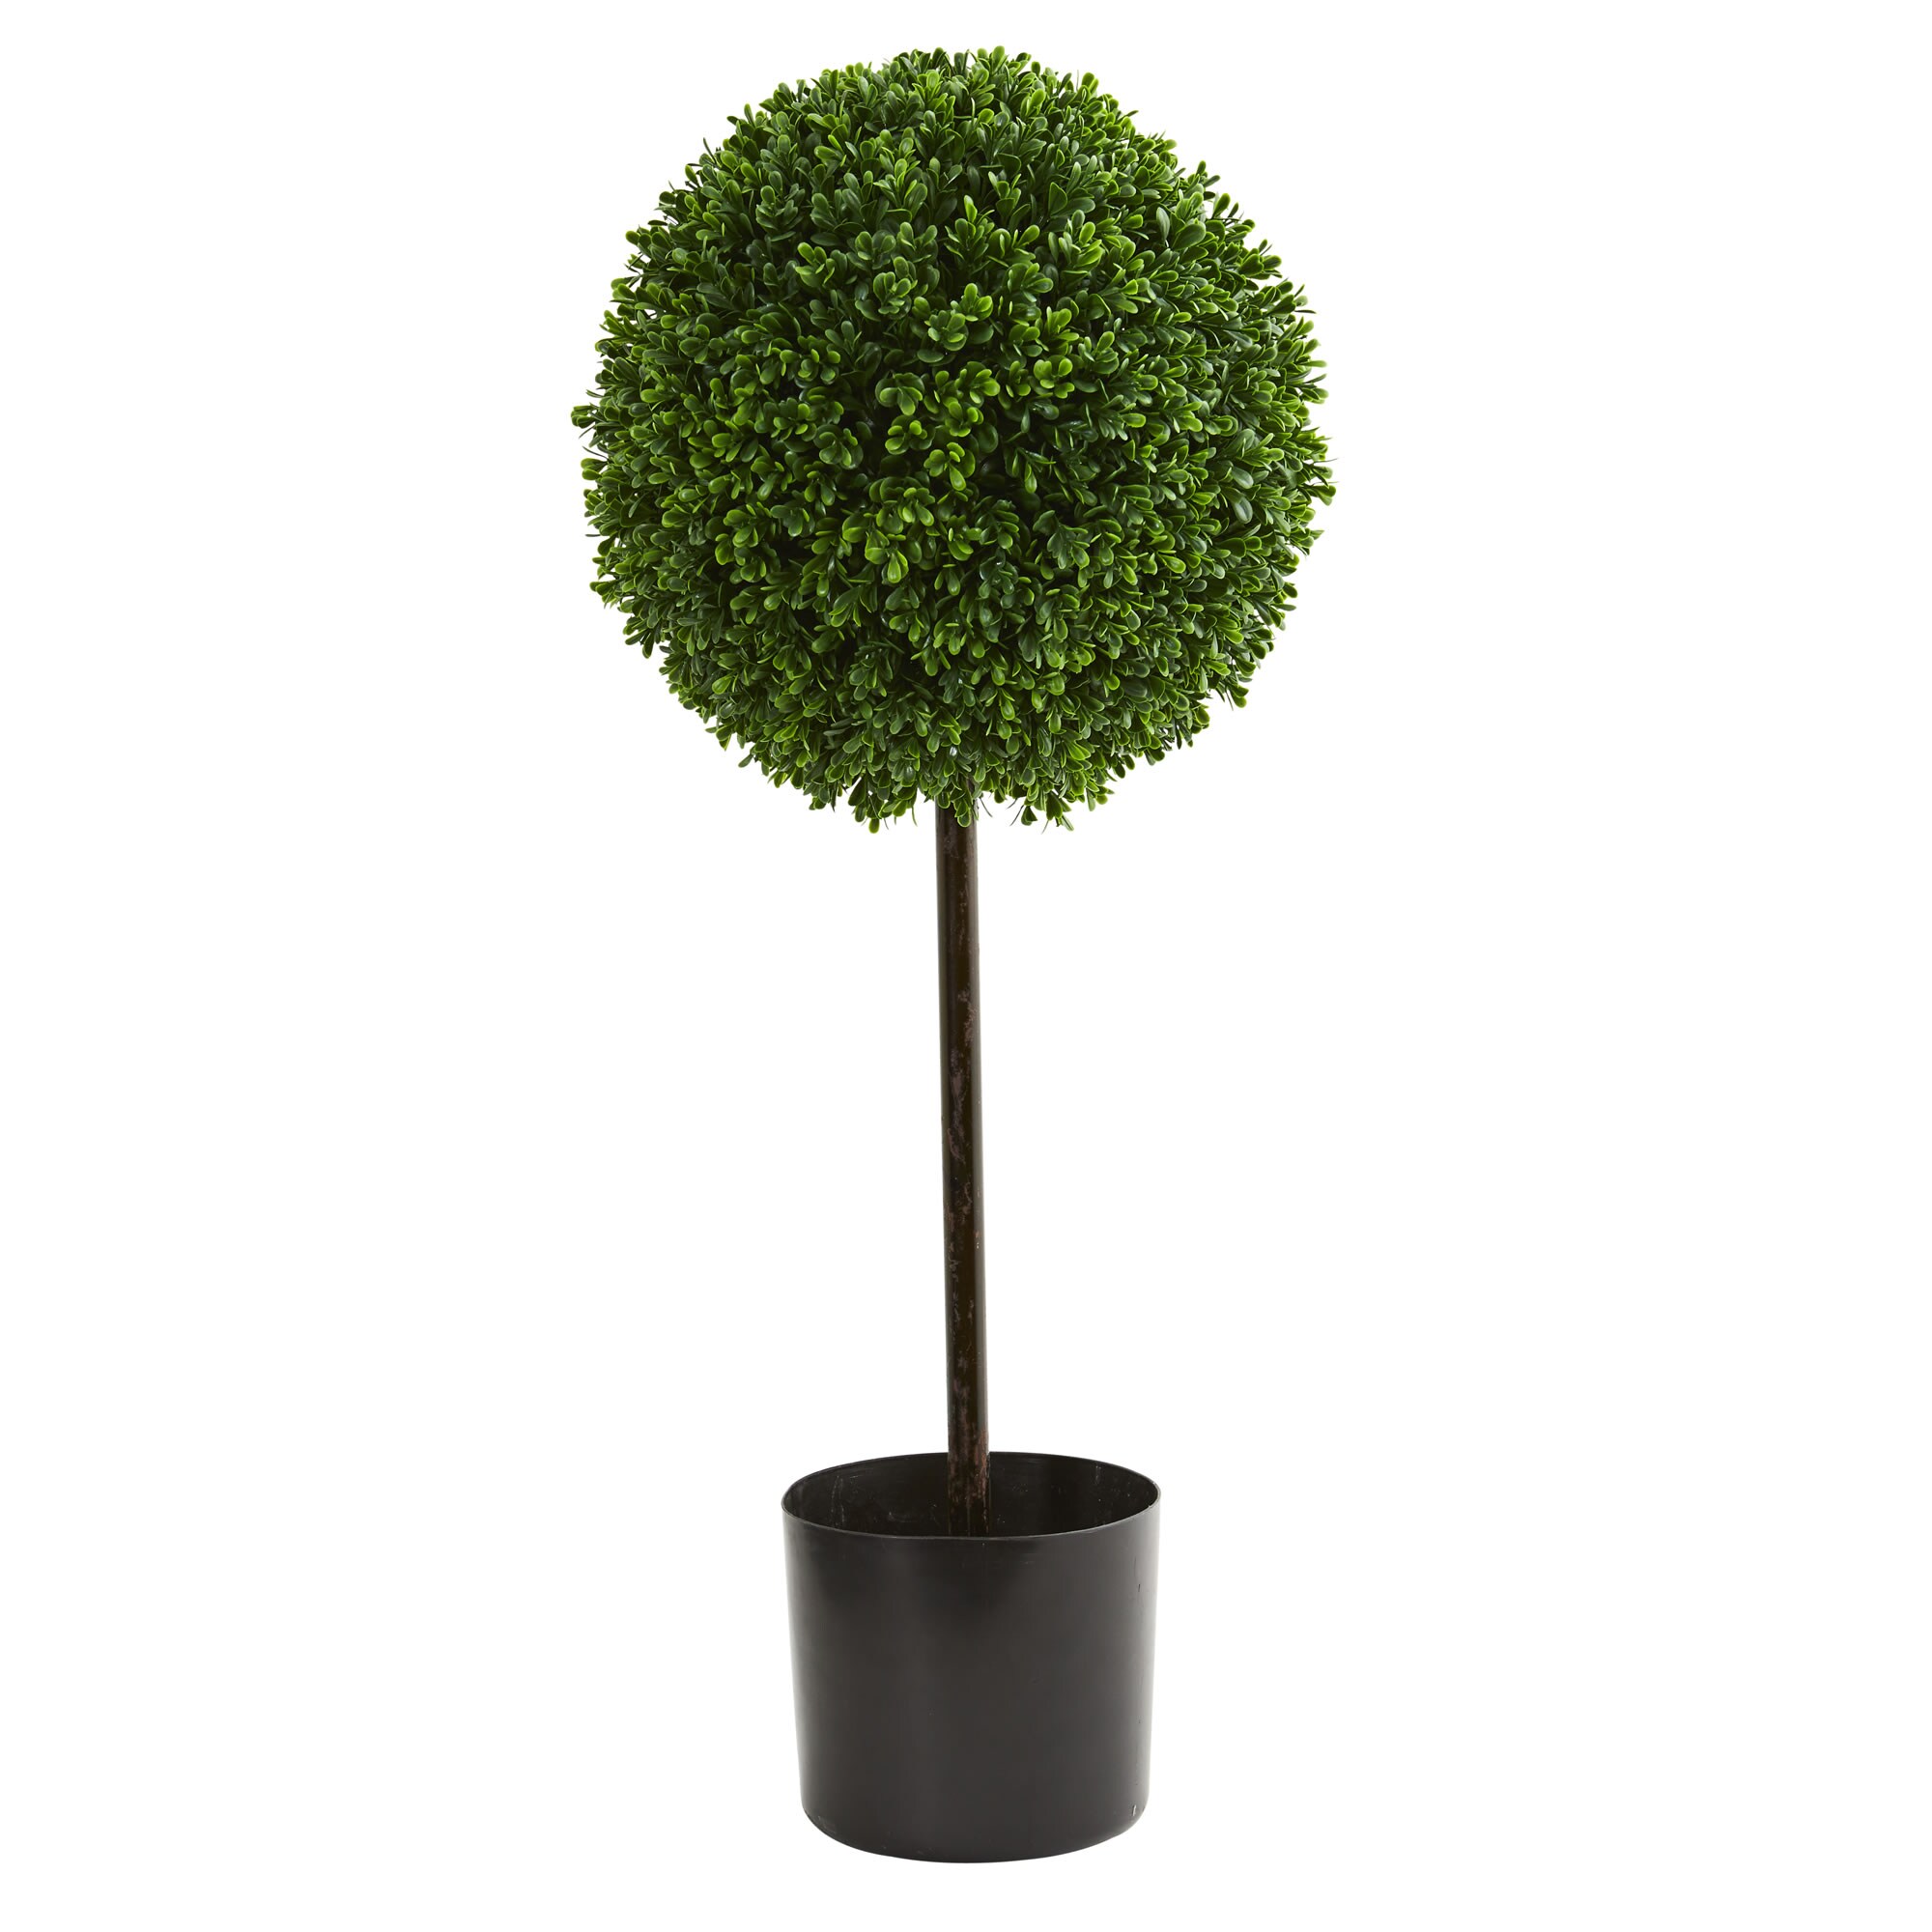 Artificial Boxwood Topiary Tree Ball Shaped Topiary Plant Tree in Plastic Pot Indoor/Outdoor Plants 